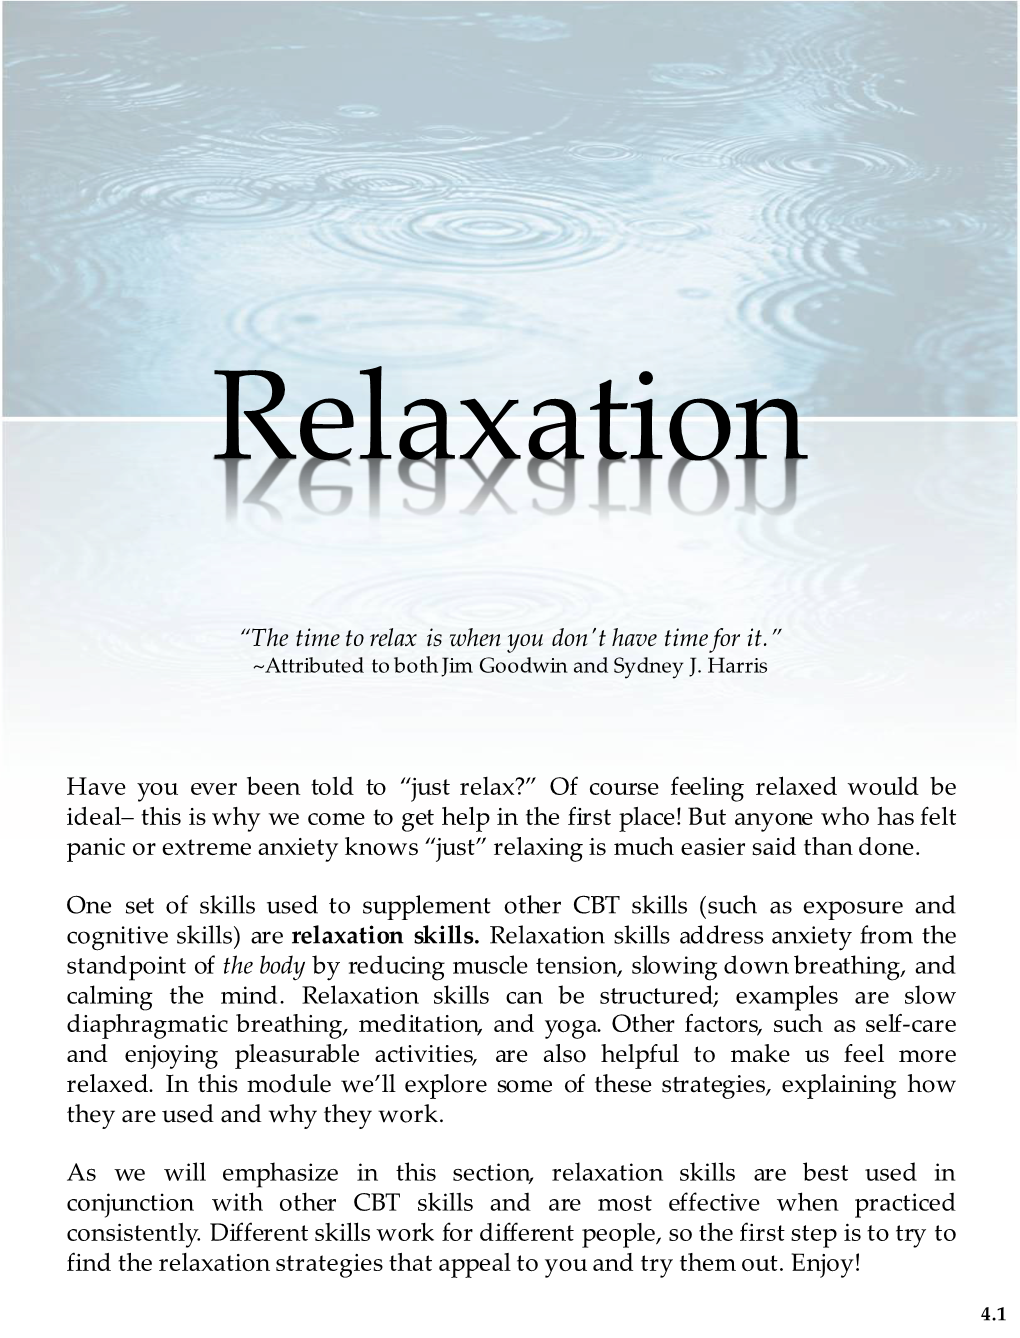 Relaxation-Skills-For-Anxiety.Pdf